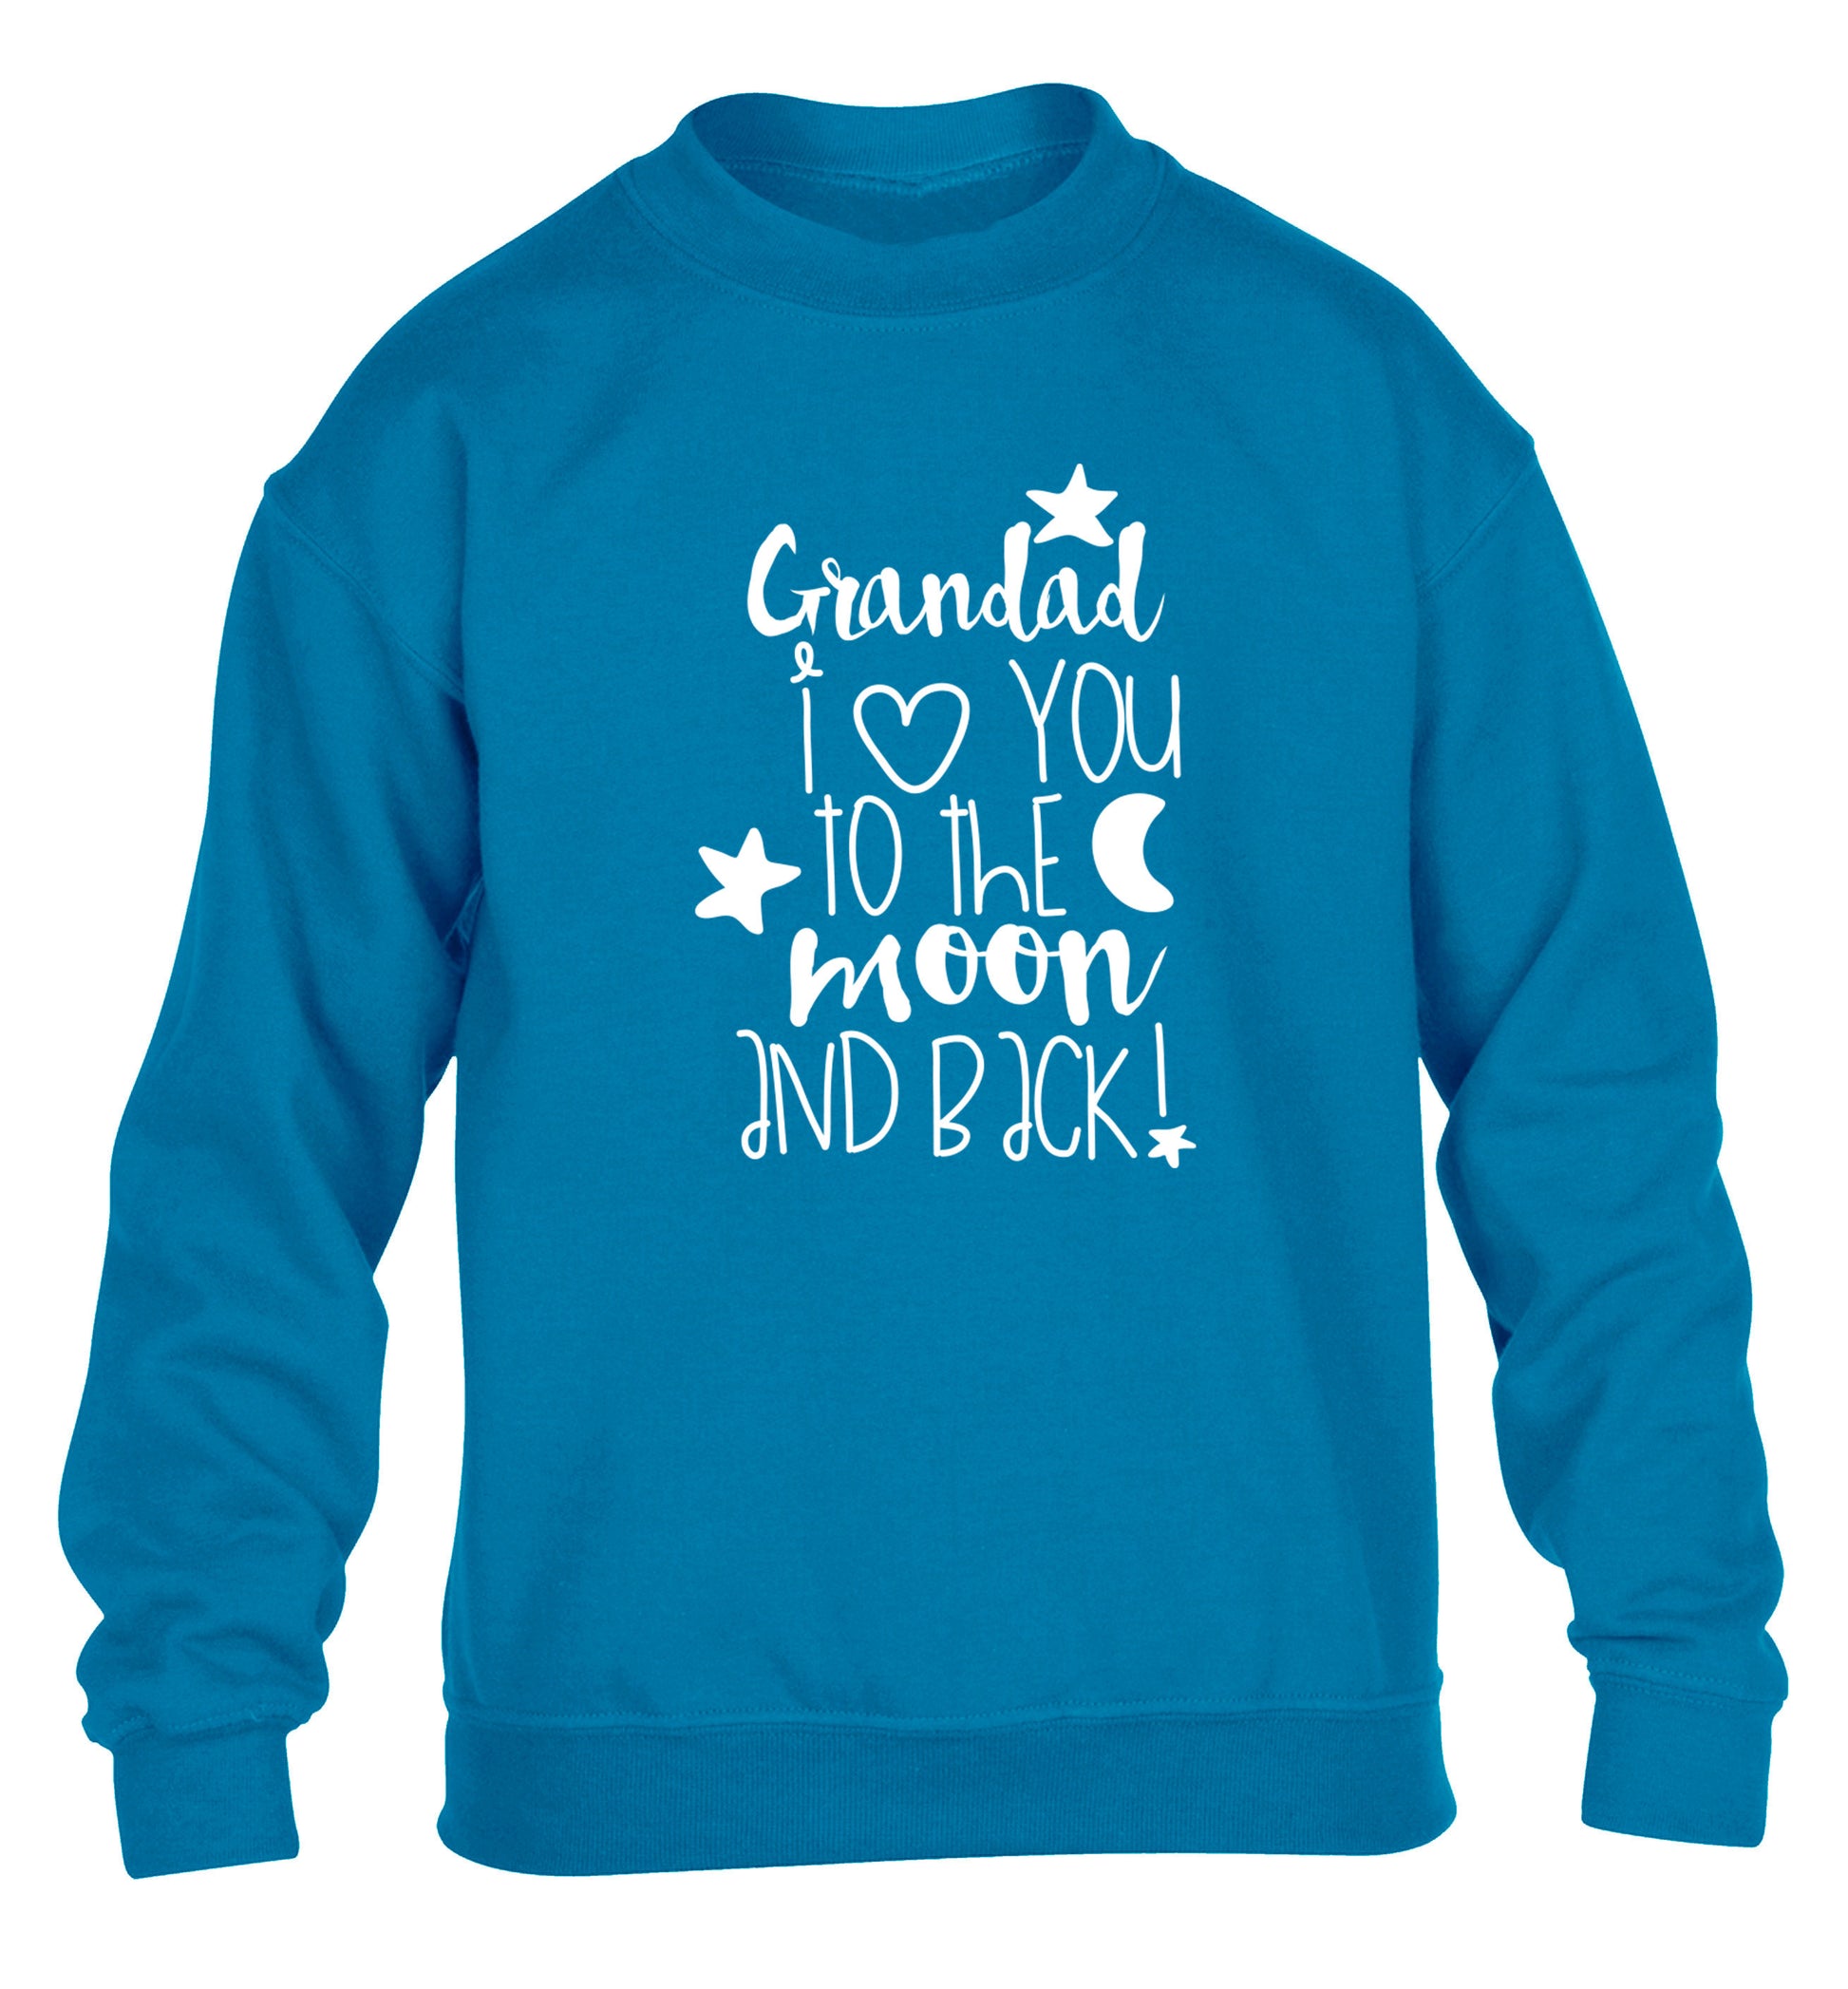 Grandad's I love you to the moon and back children's blue  sweater 12-14 Years